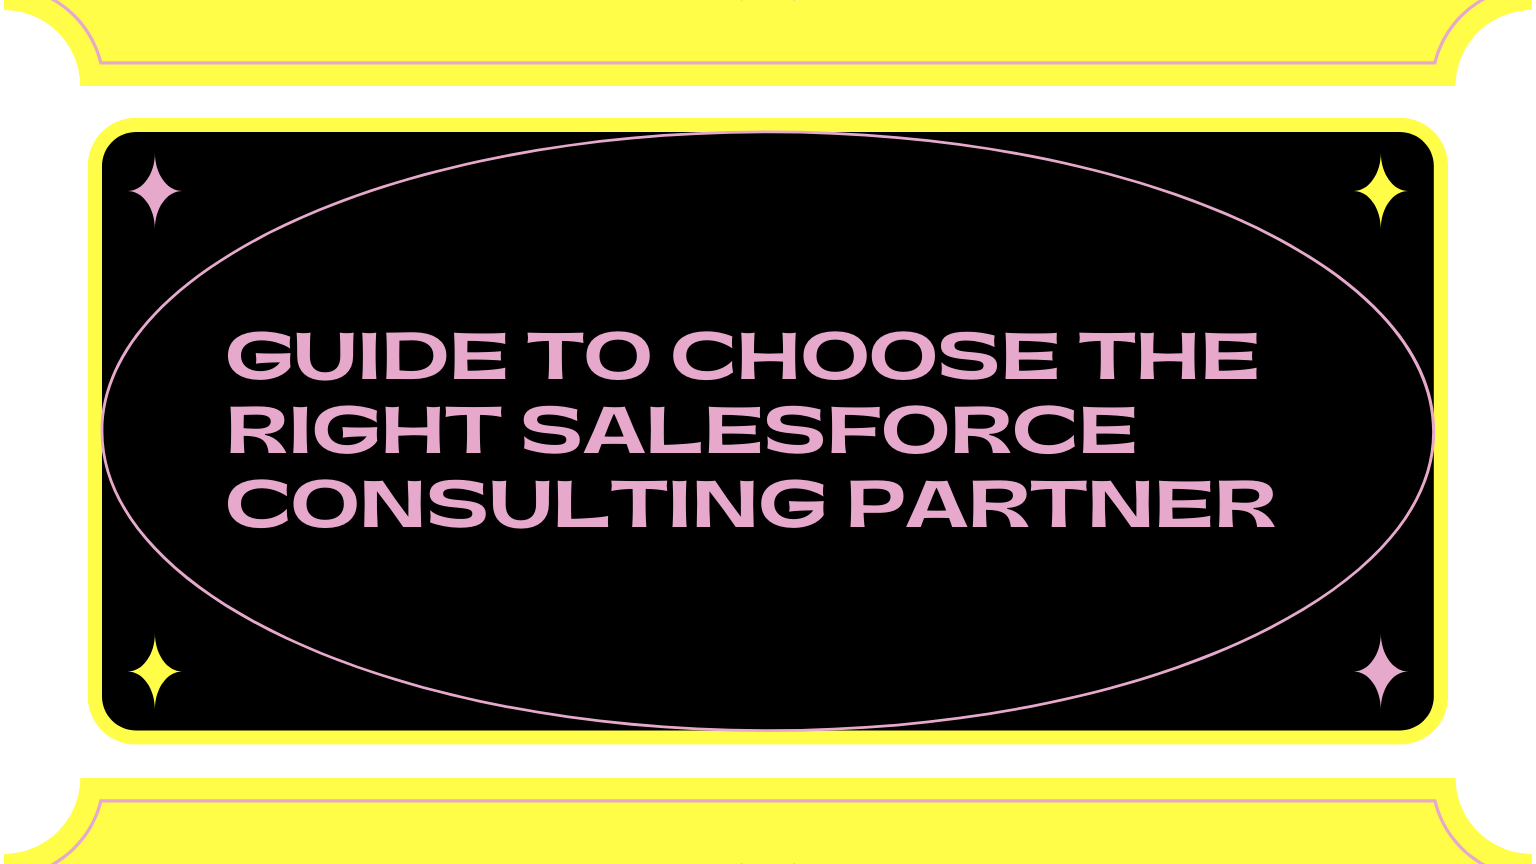 How to choose the right salesforce consulting partner